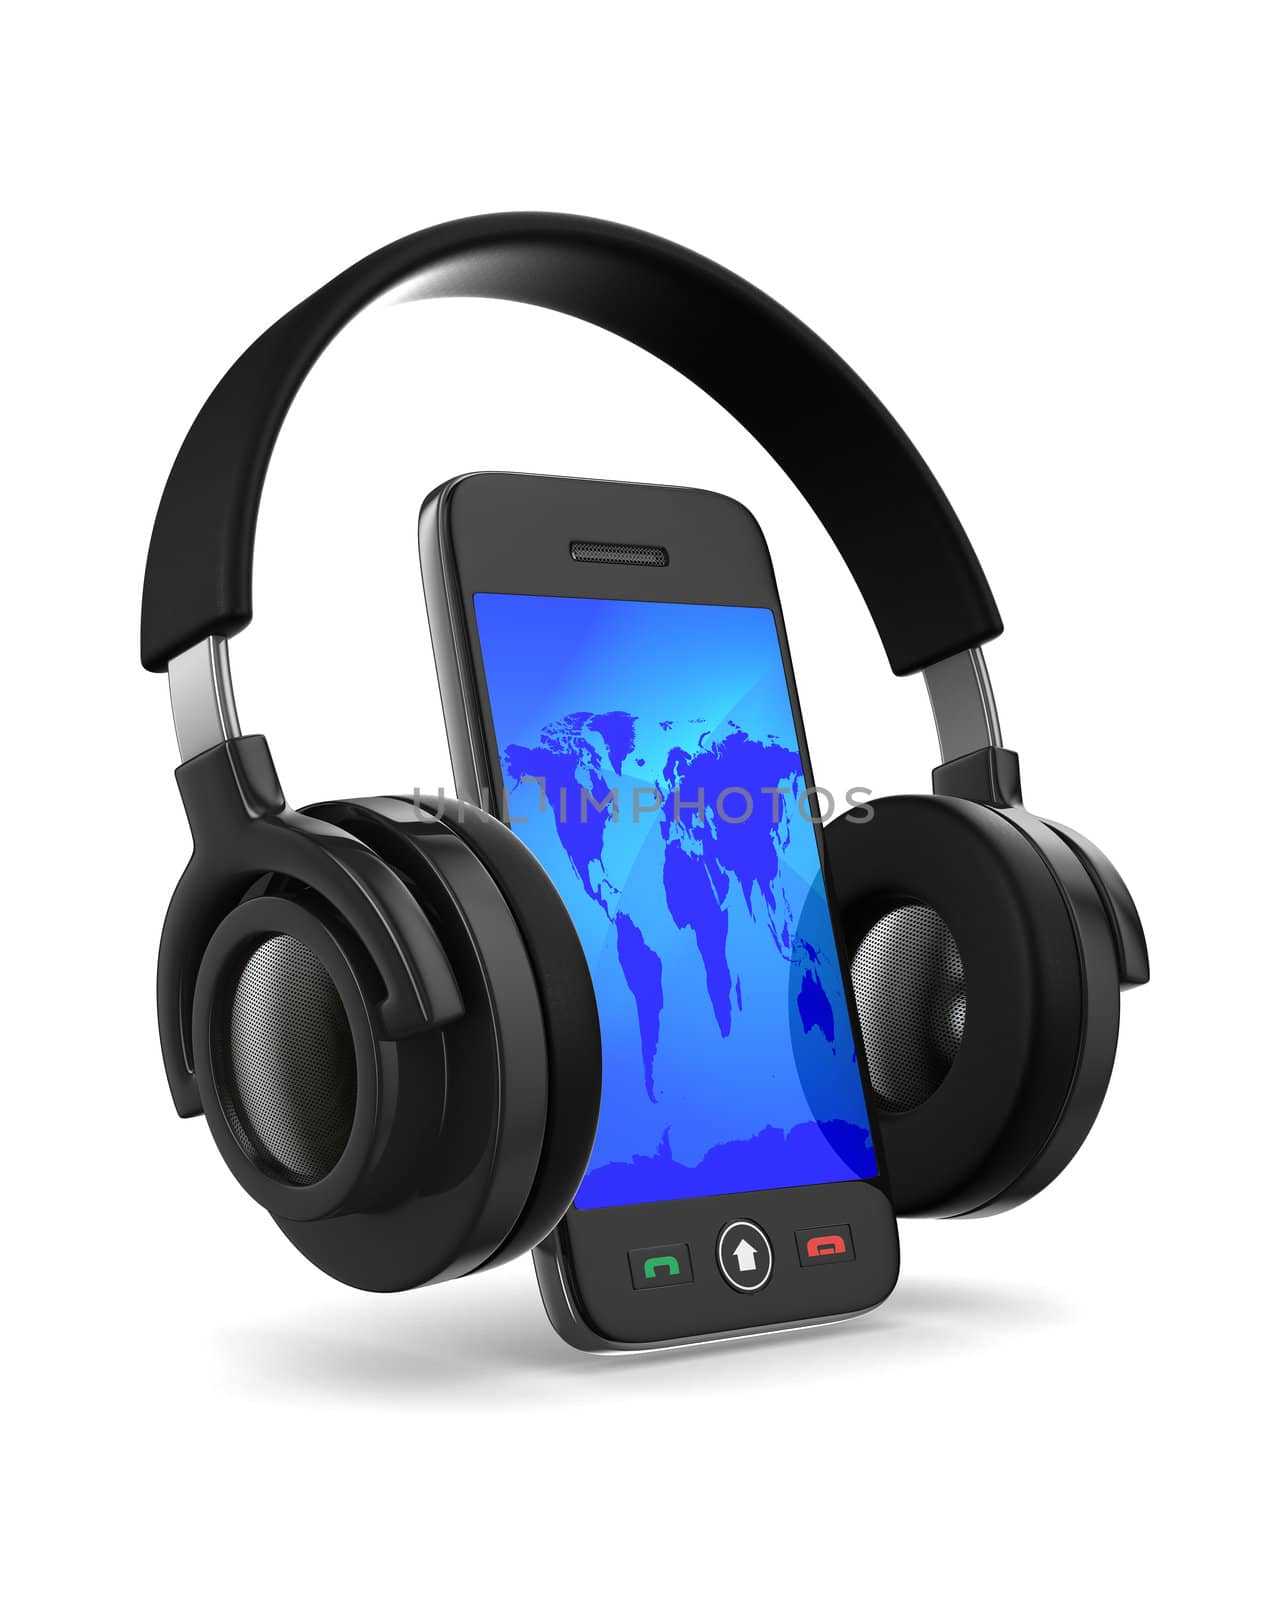 phone and headphone on white background. Isolated 3D image